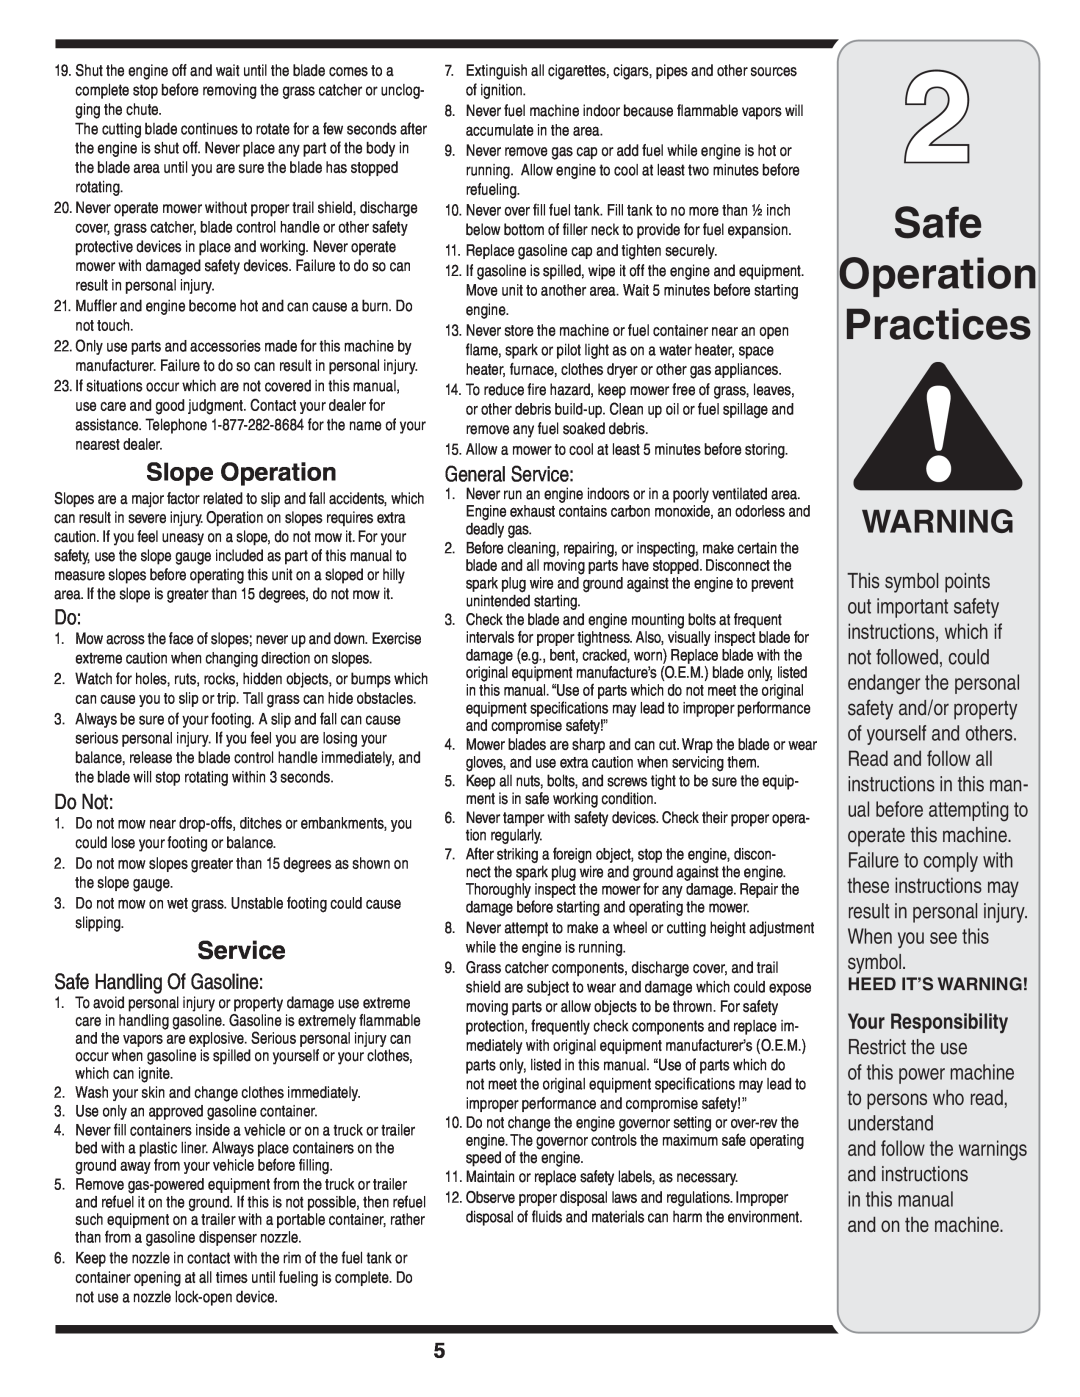 Cub Cadet 439 warranty Safe Operation Practices, Slope Operation, Service, Your Responsibility 